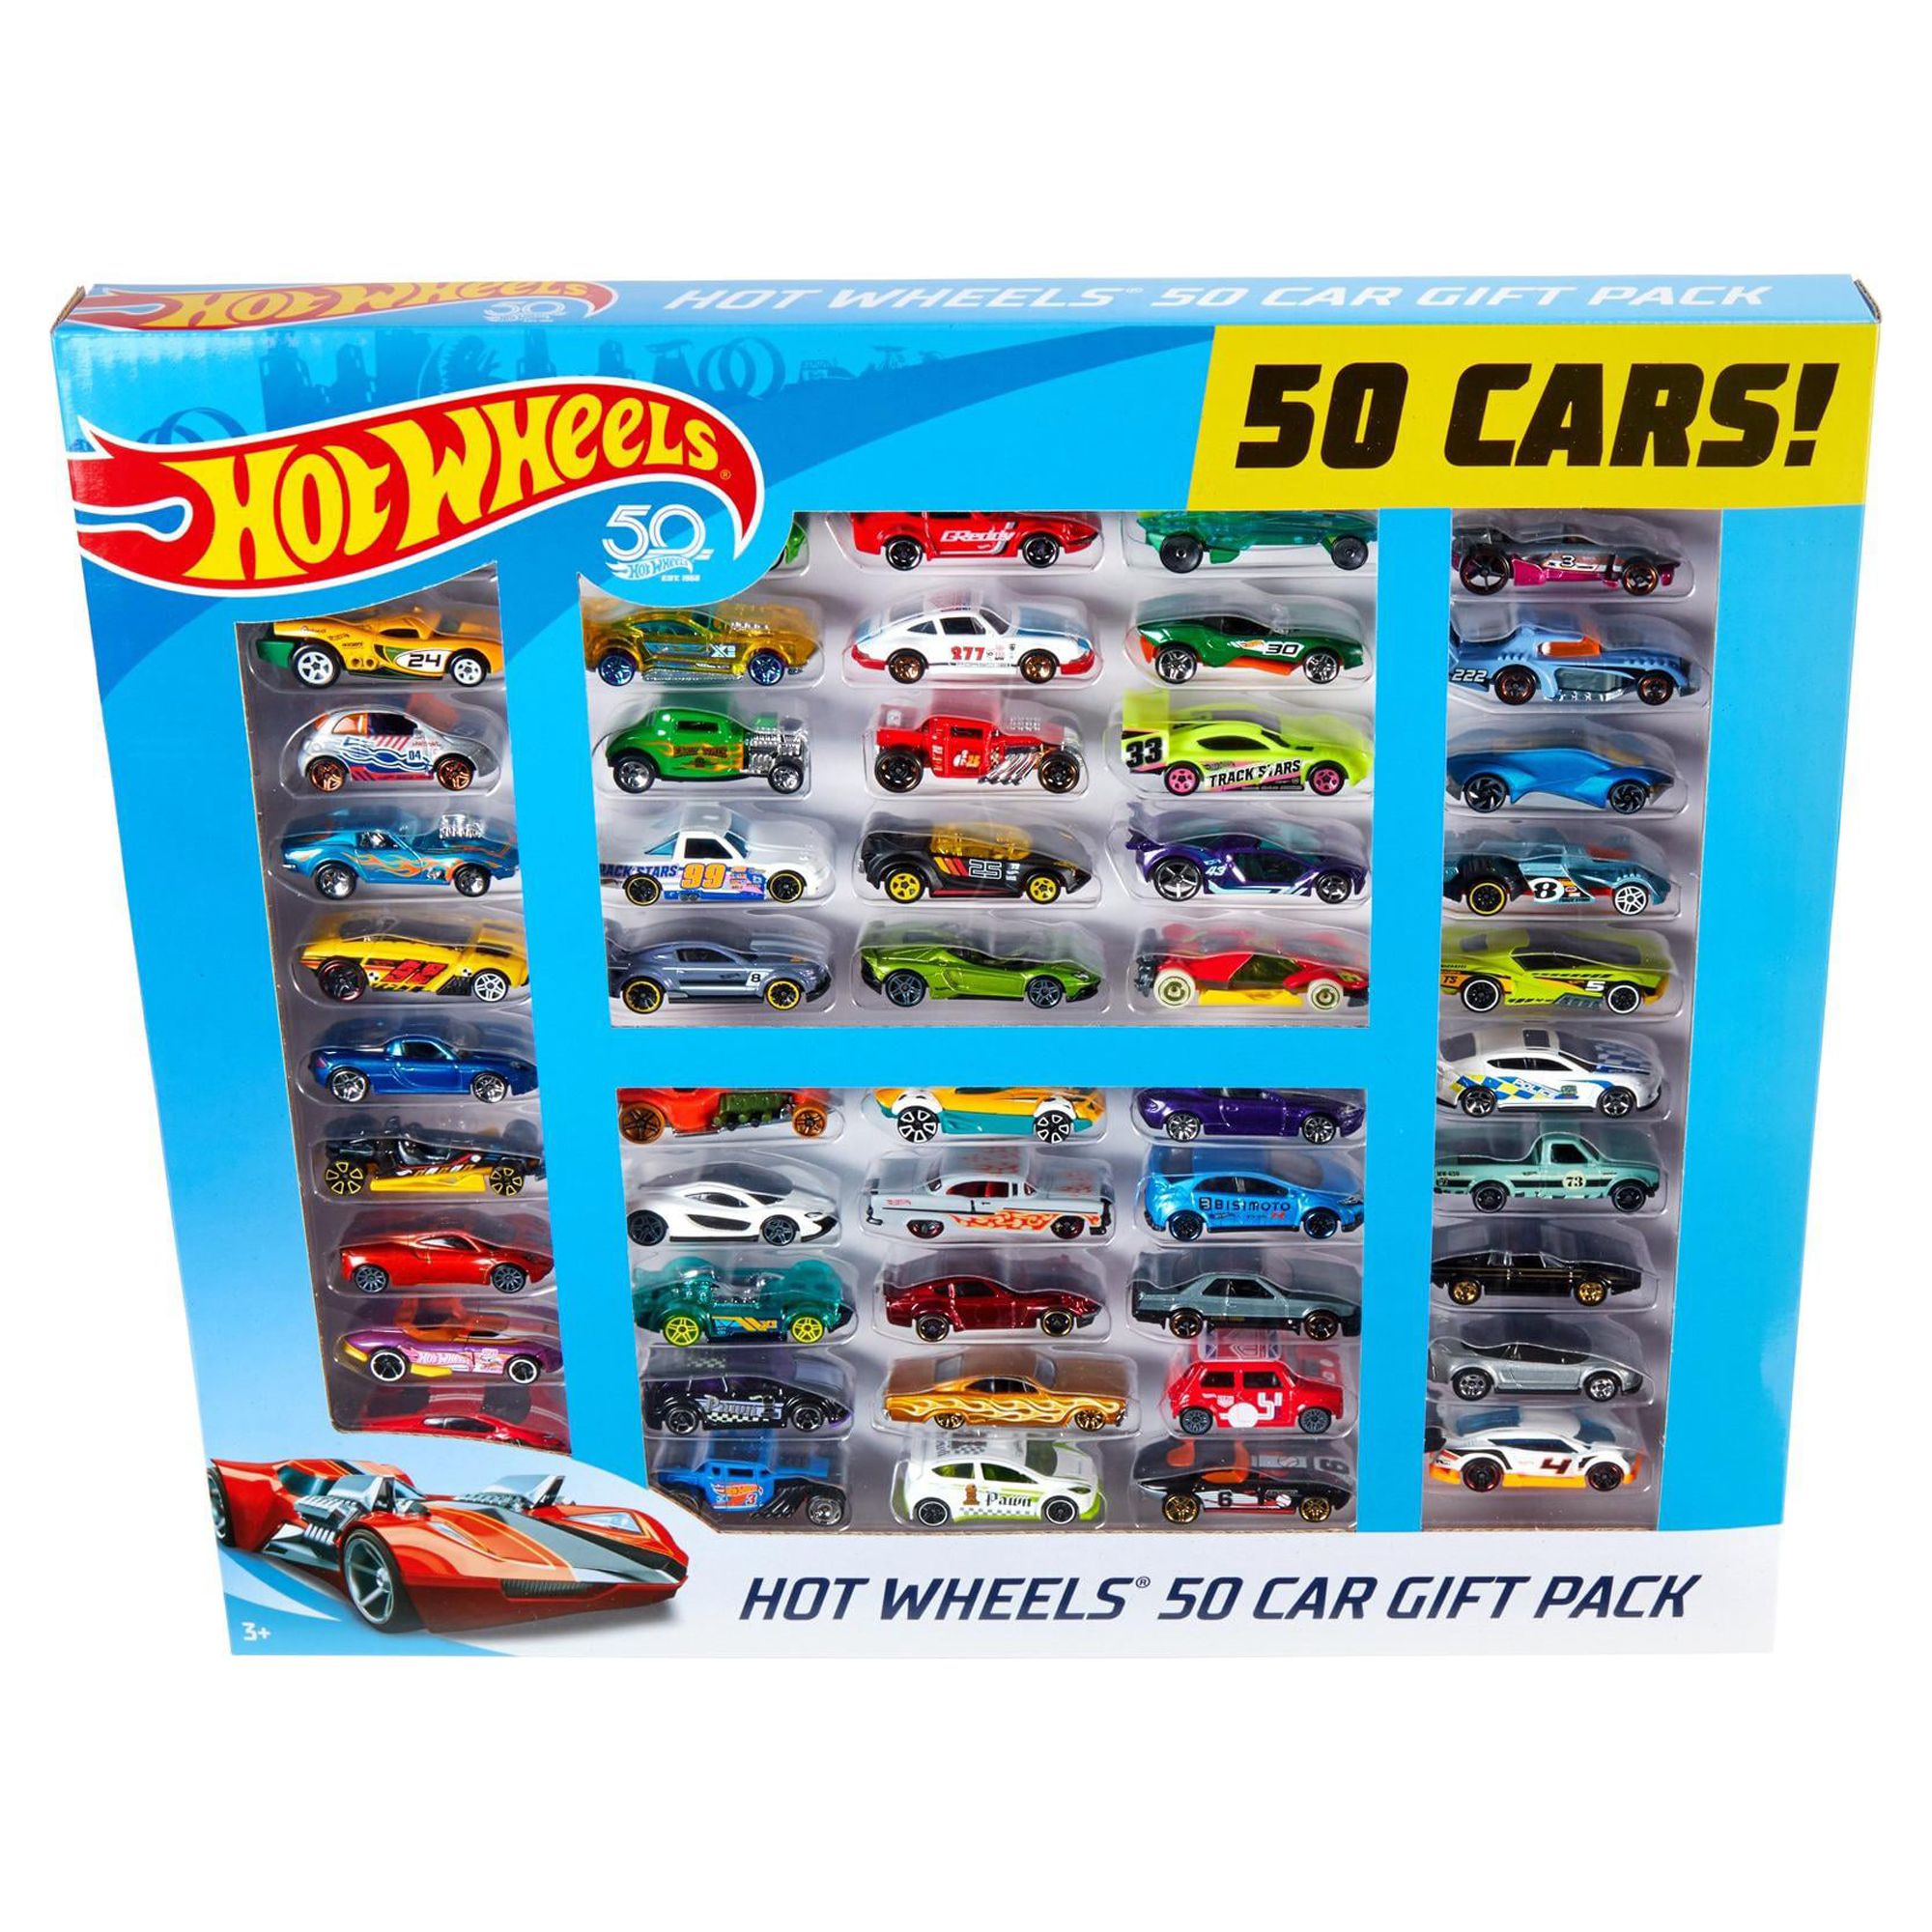 Hot Wheels Ultimate Collectors Gift Pack Car Vehicle Playset (50 Pieces) - image 1 of 20